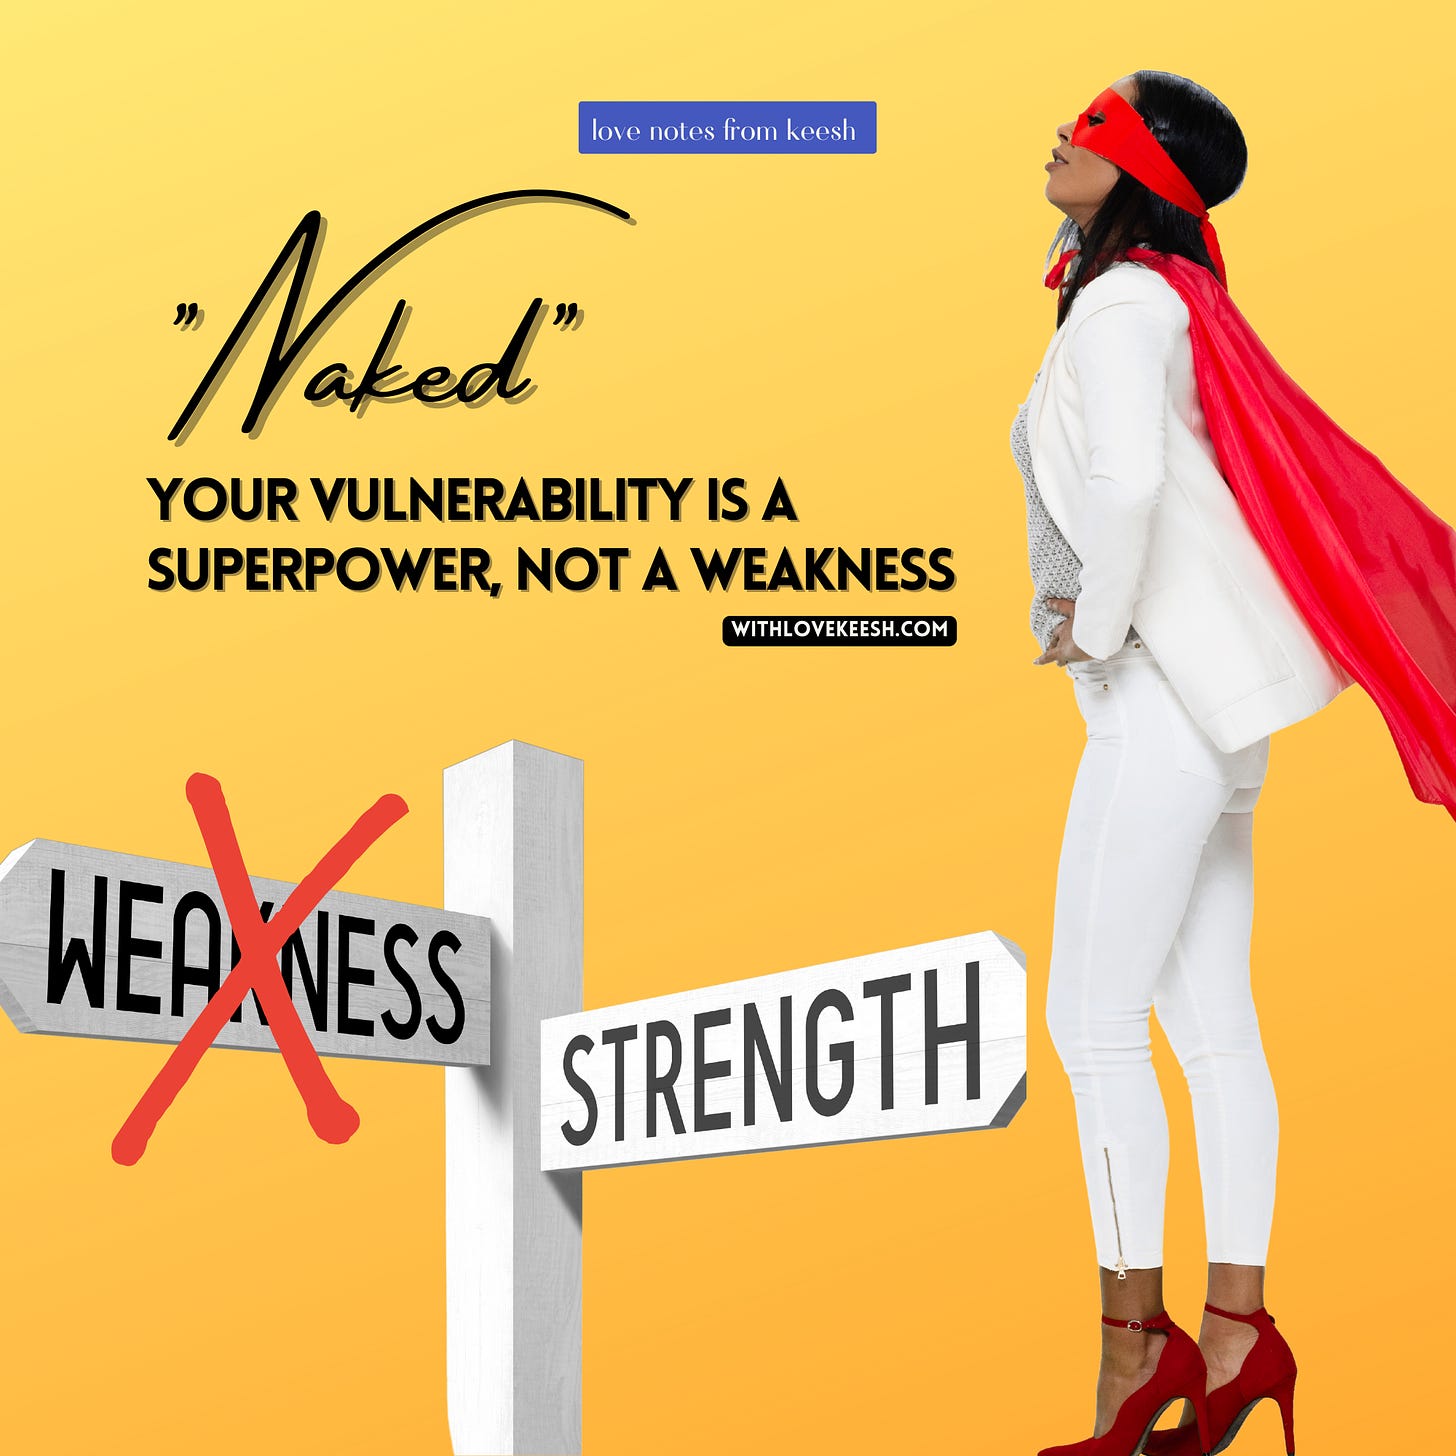 "Naked" Your vulnerability is a superpower, not a weakness 